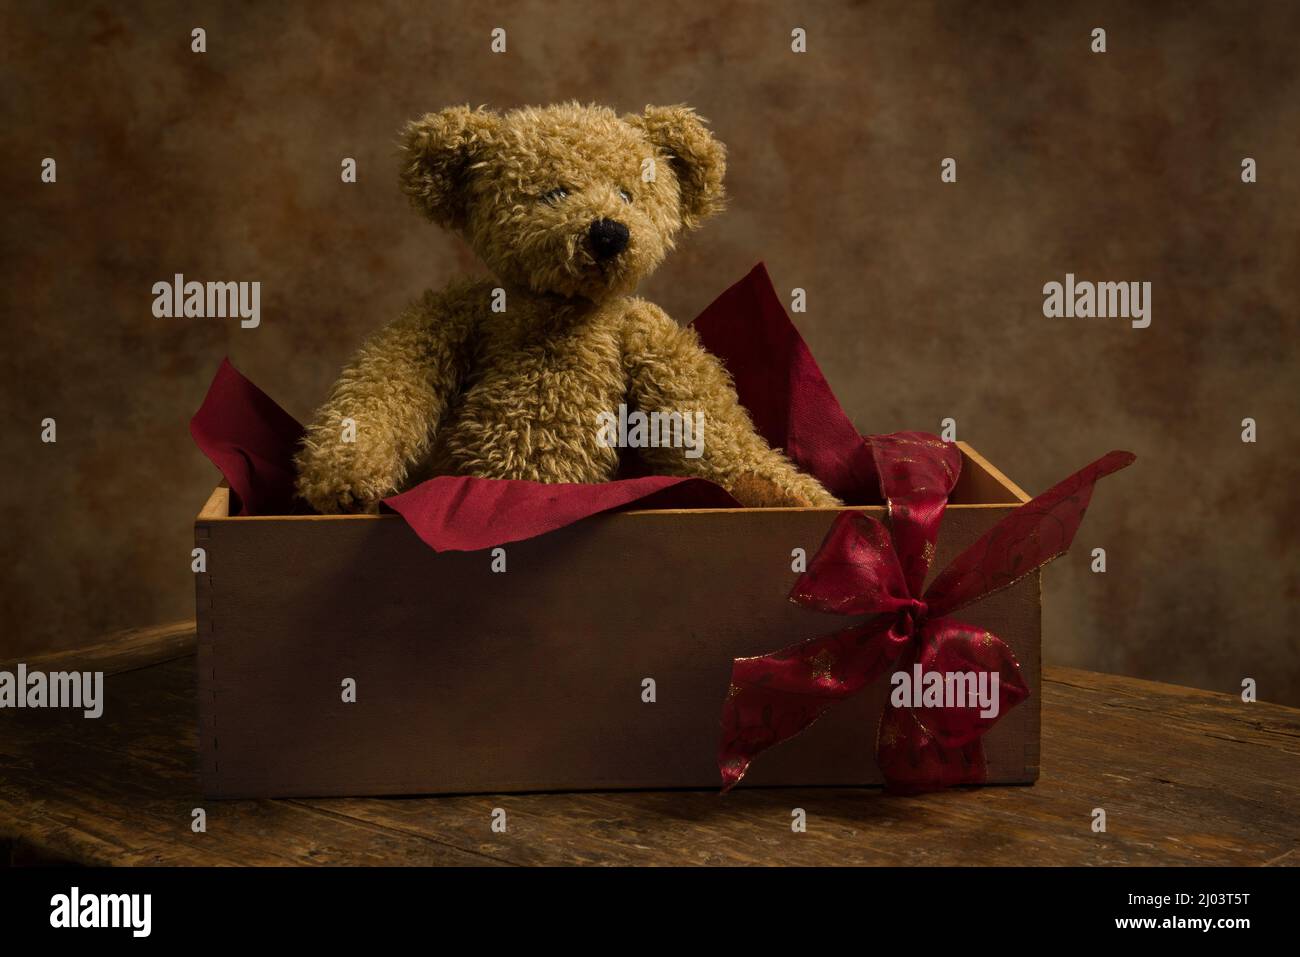 Cute little teddy bear tucked in a wooden box with a gift ribbon. Stock Photo